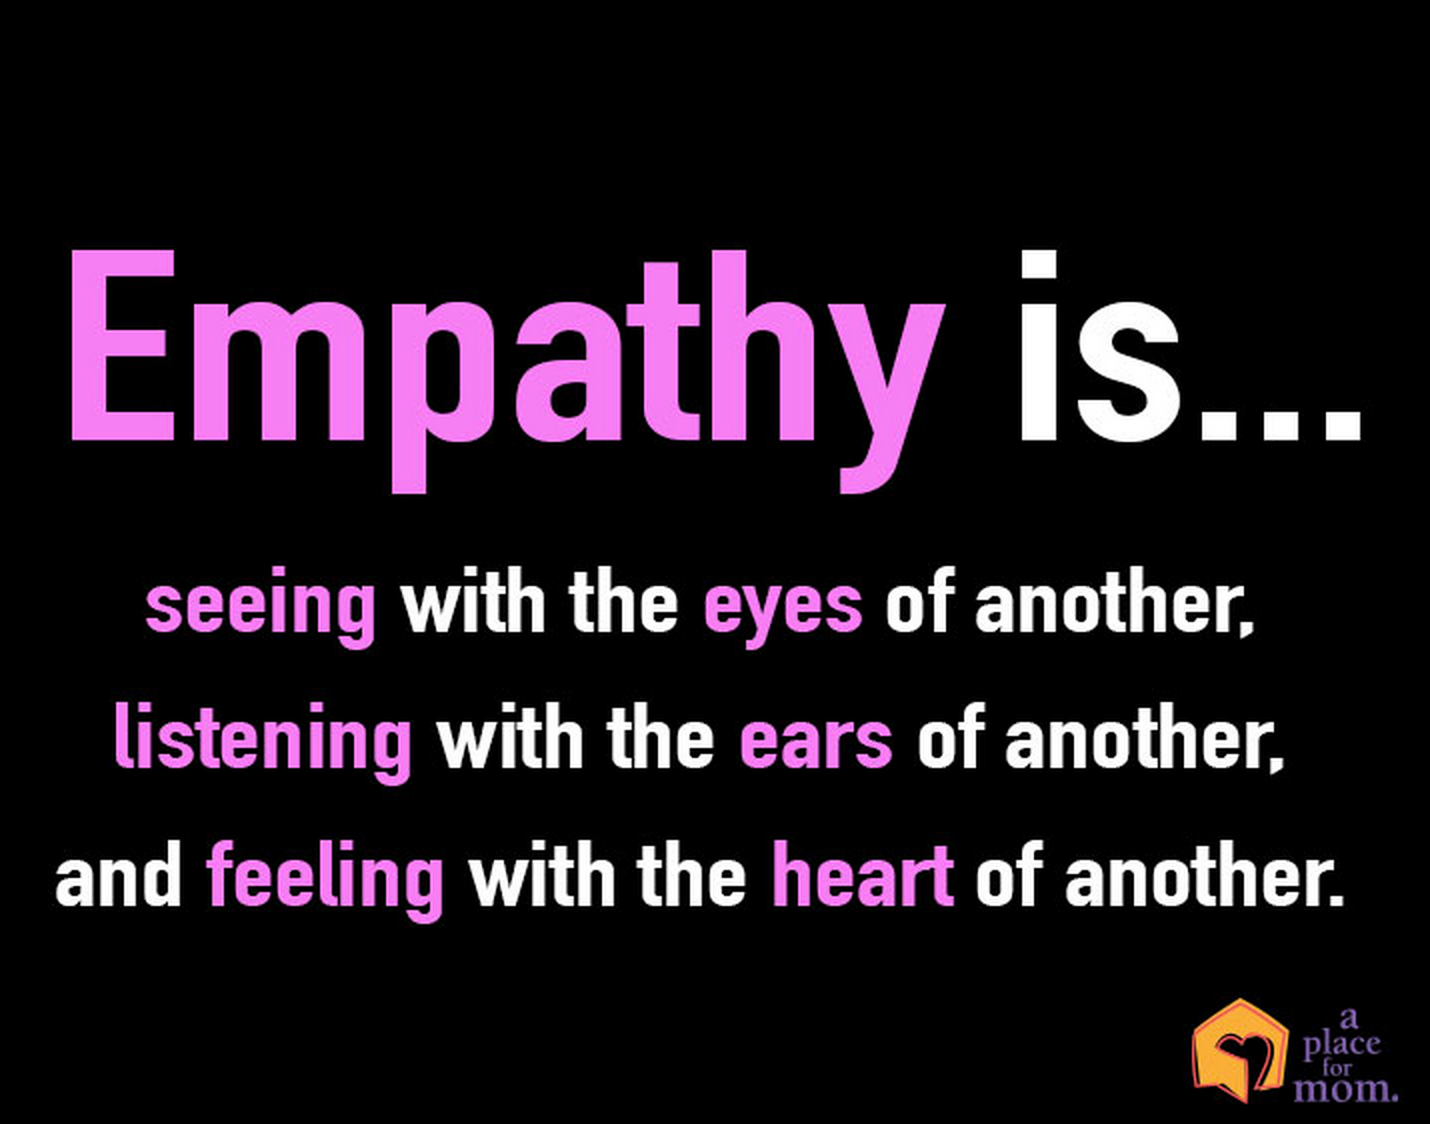 Empathy Quotes on Pinterest | Quotes About Compassion, Unloved Quotes